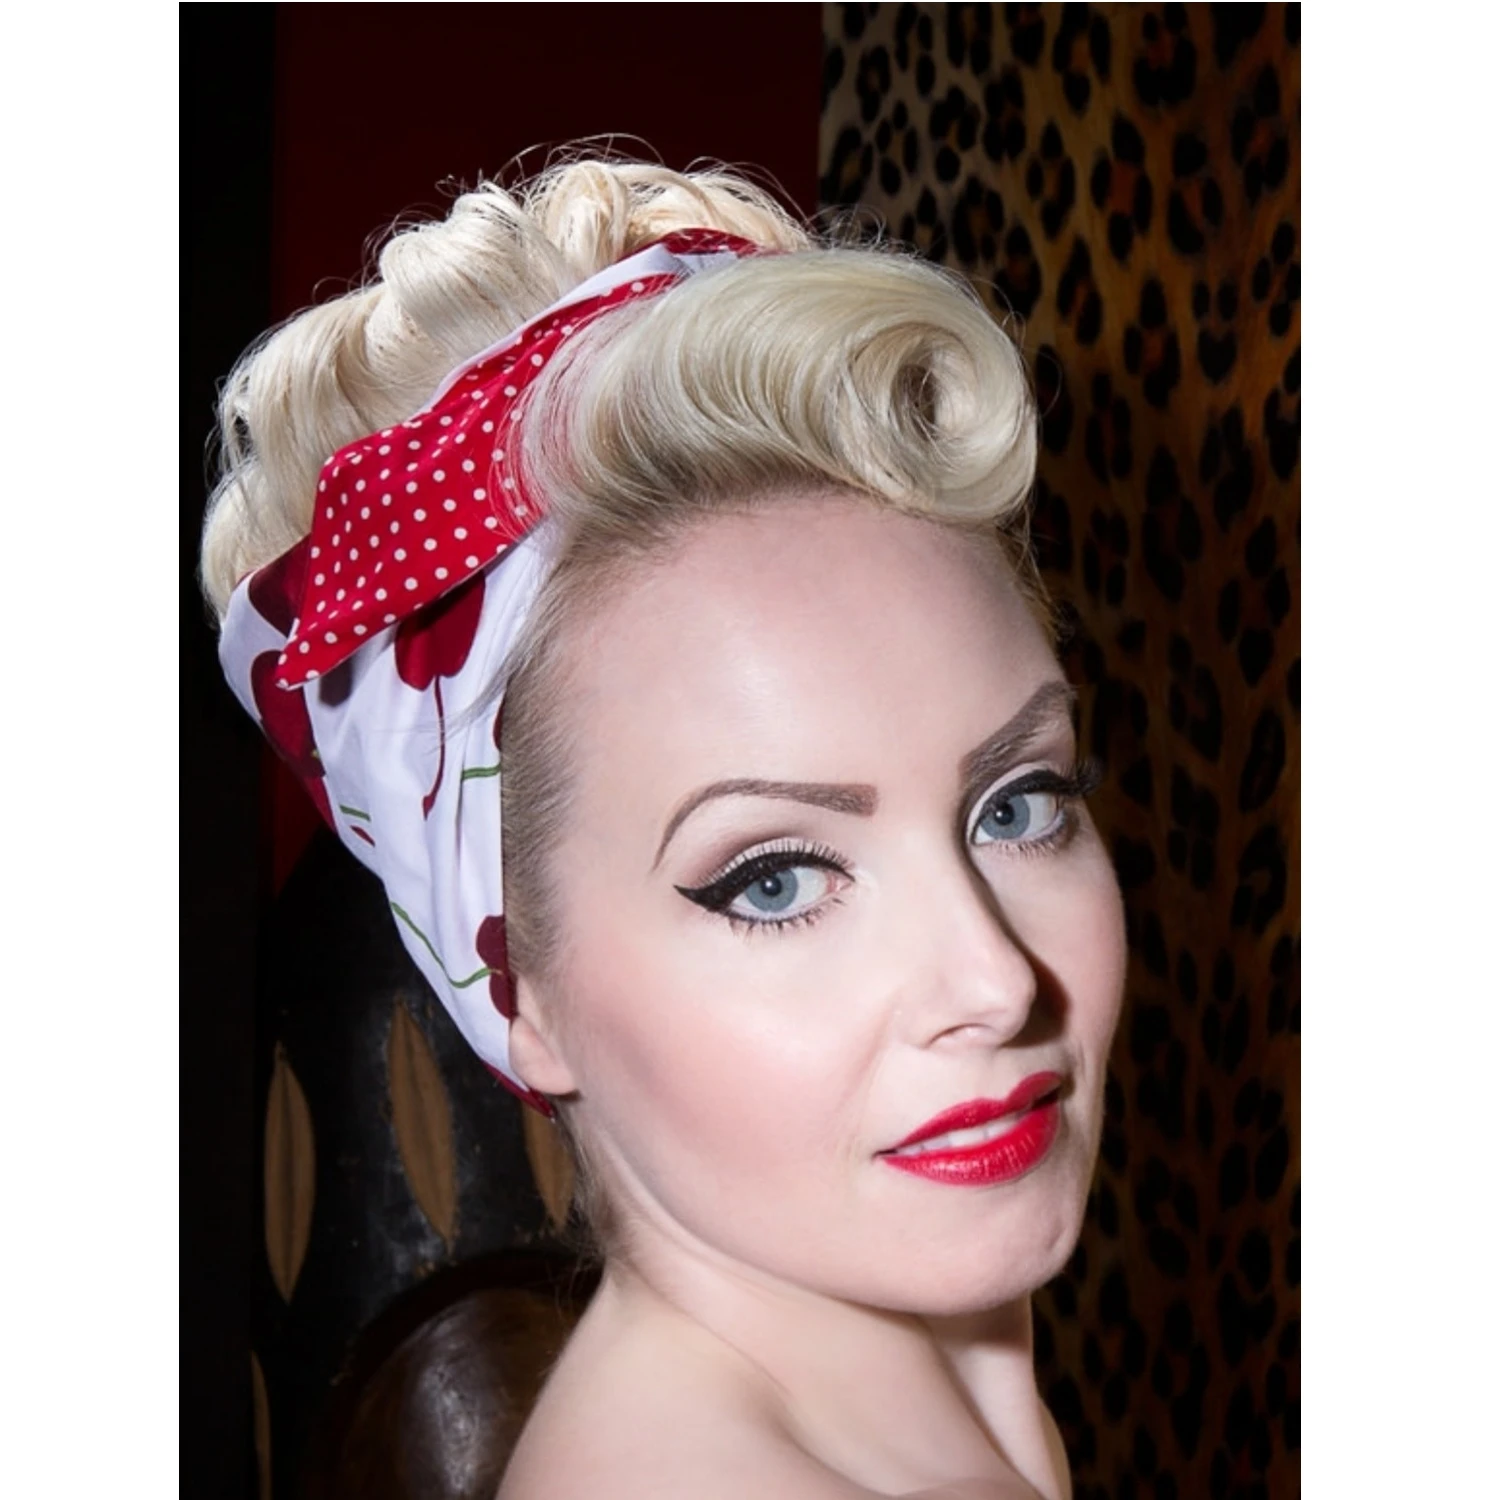 7 Fabulous Pinup Hair Tutorials to Look beyond Gorgeous ...